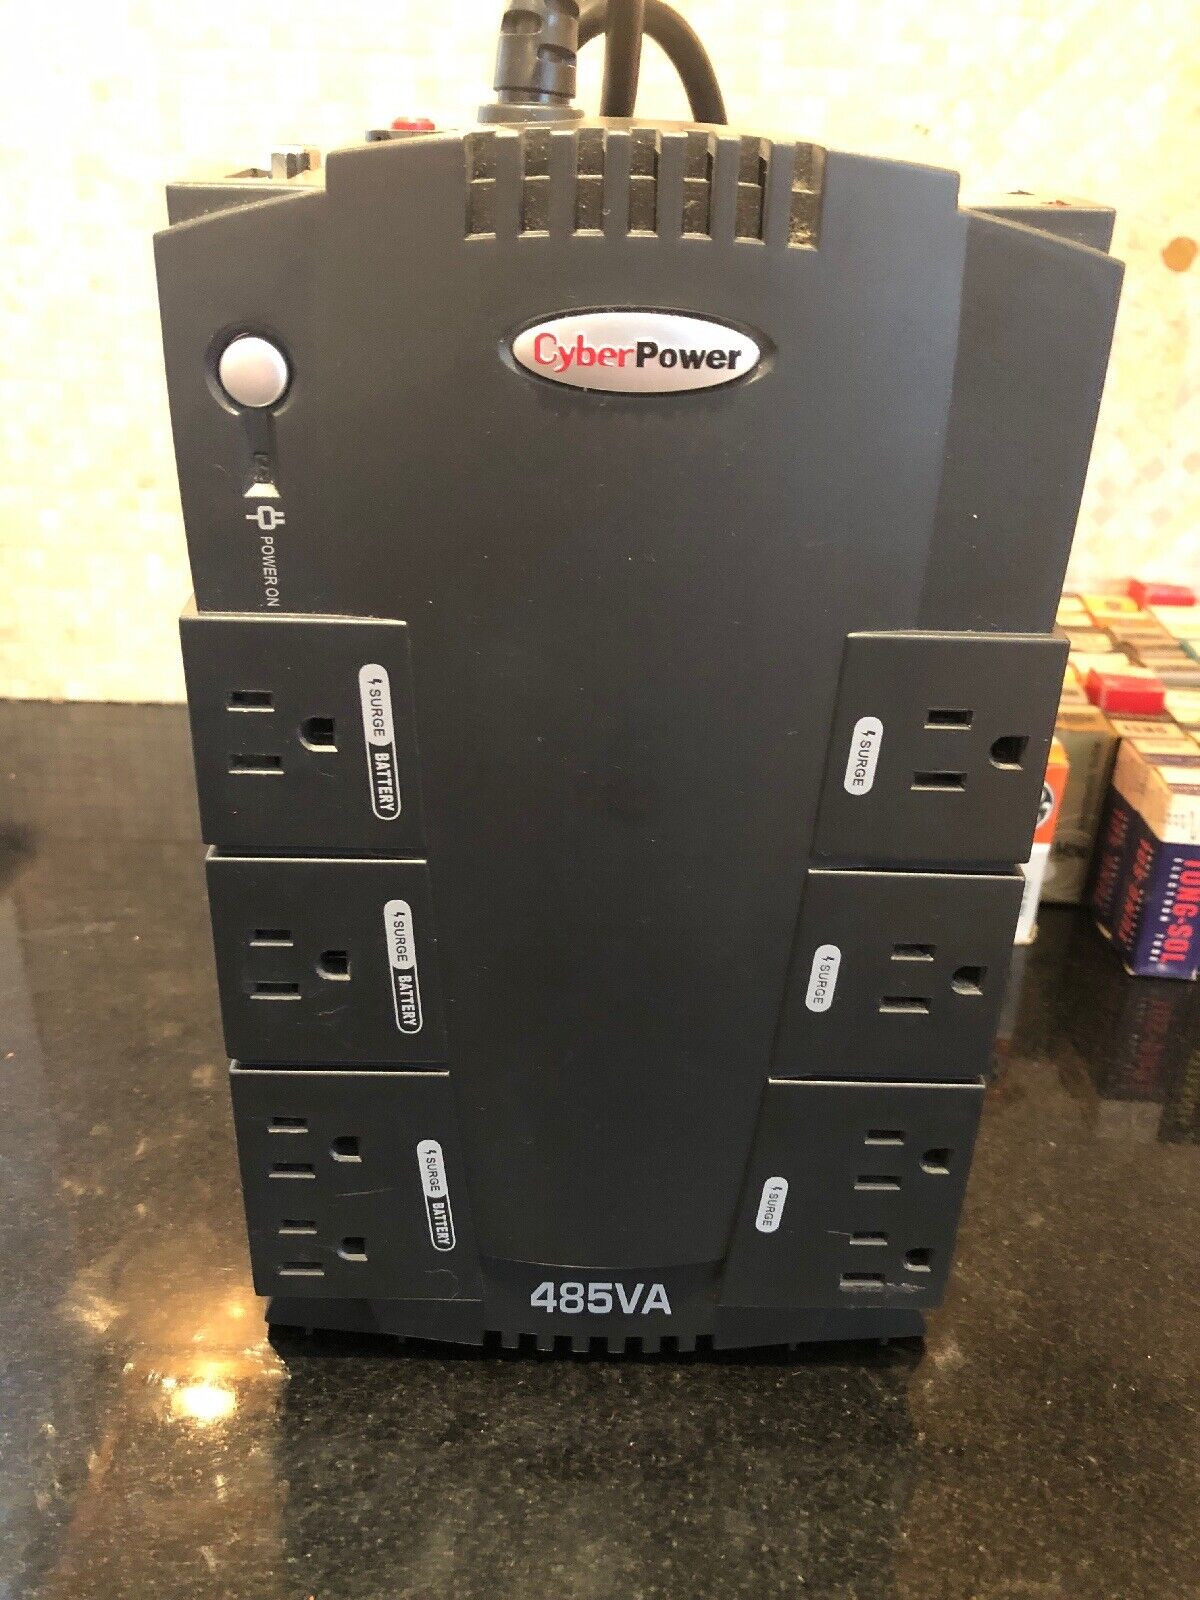 Mint Cyber Power 485VA Battery Backup Power Surge Protector with BATTERY